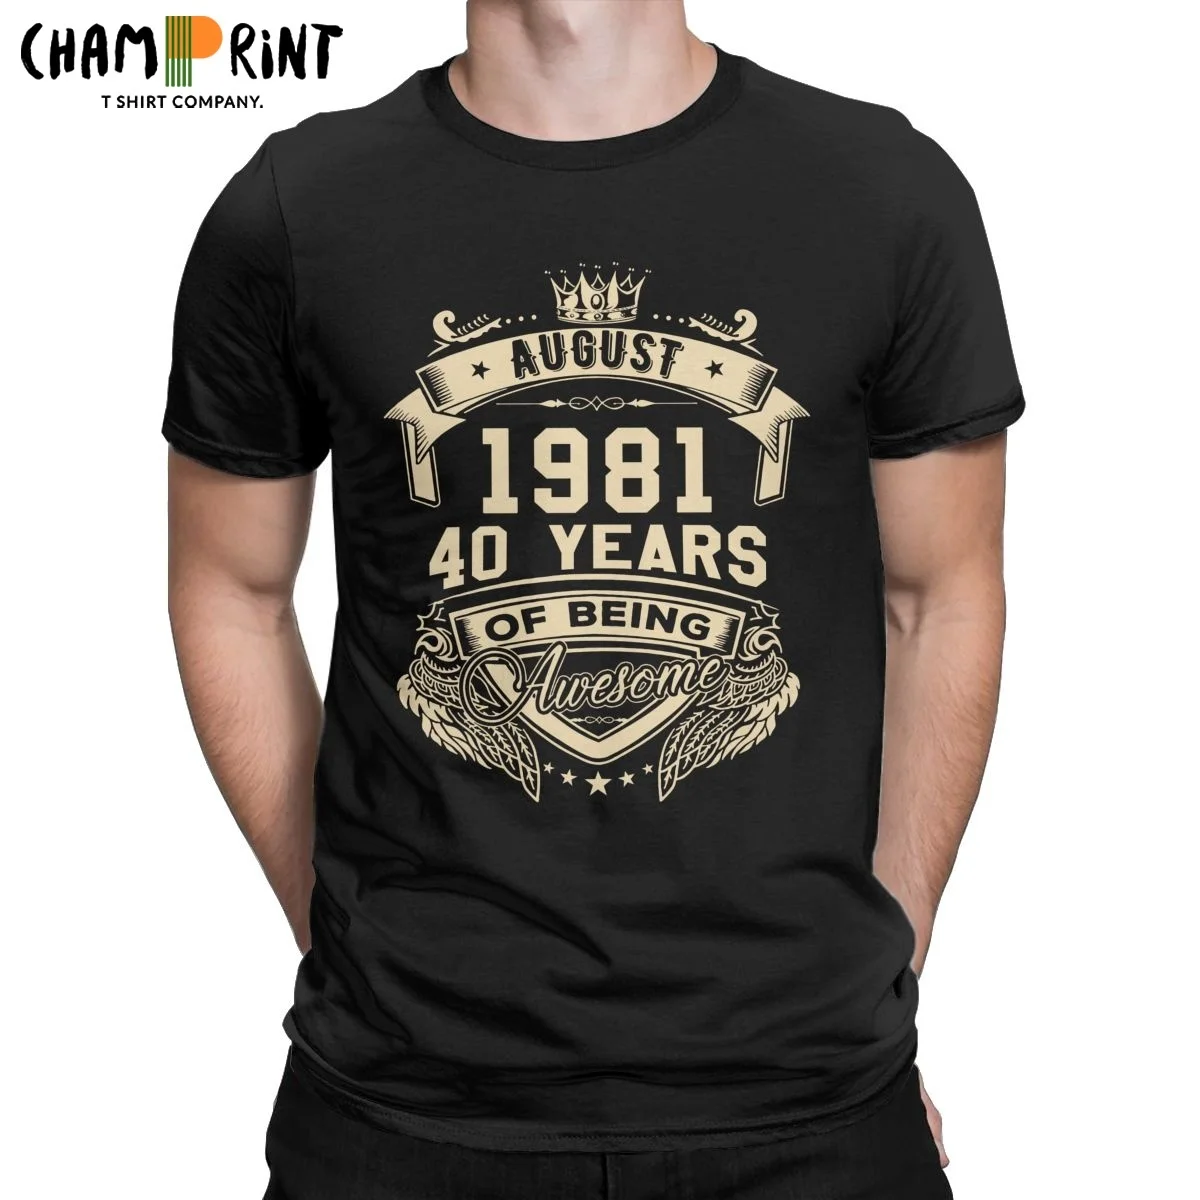 

Men T-Shirts Born In August 1981 40 Years Of Being Awesome Limited Cotton T Shirts Crew Neck Tees Clothing Adult